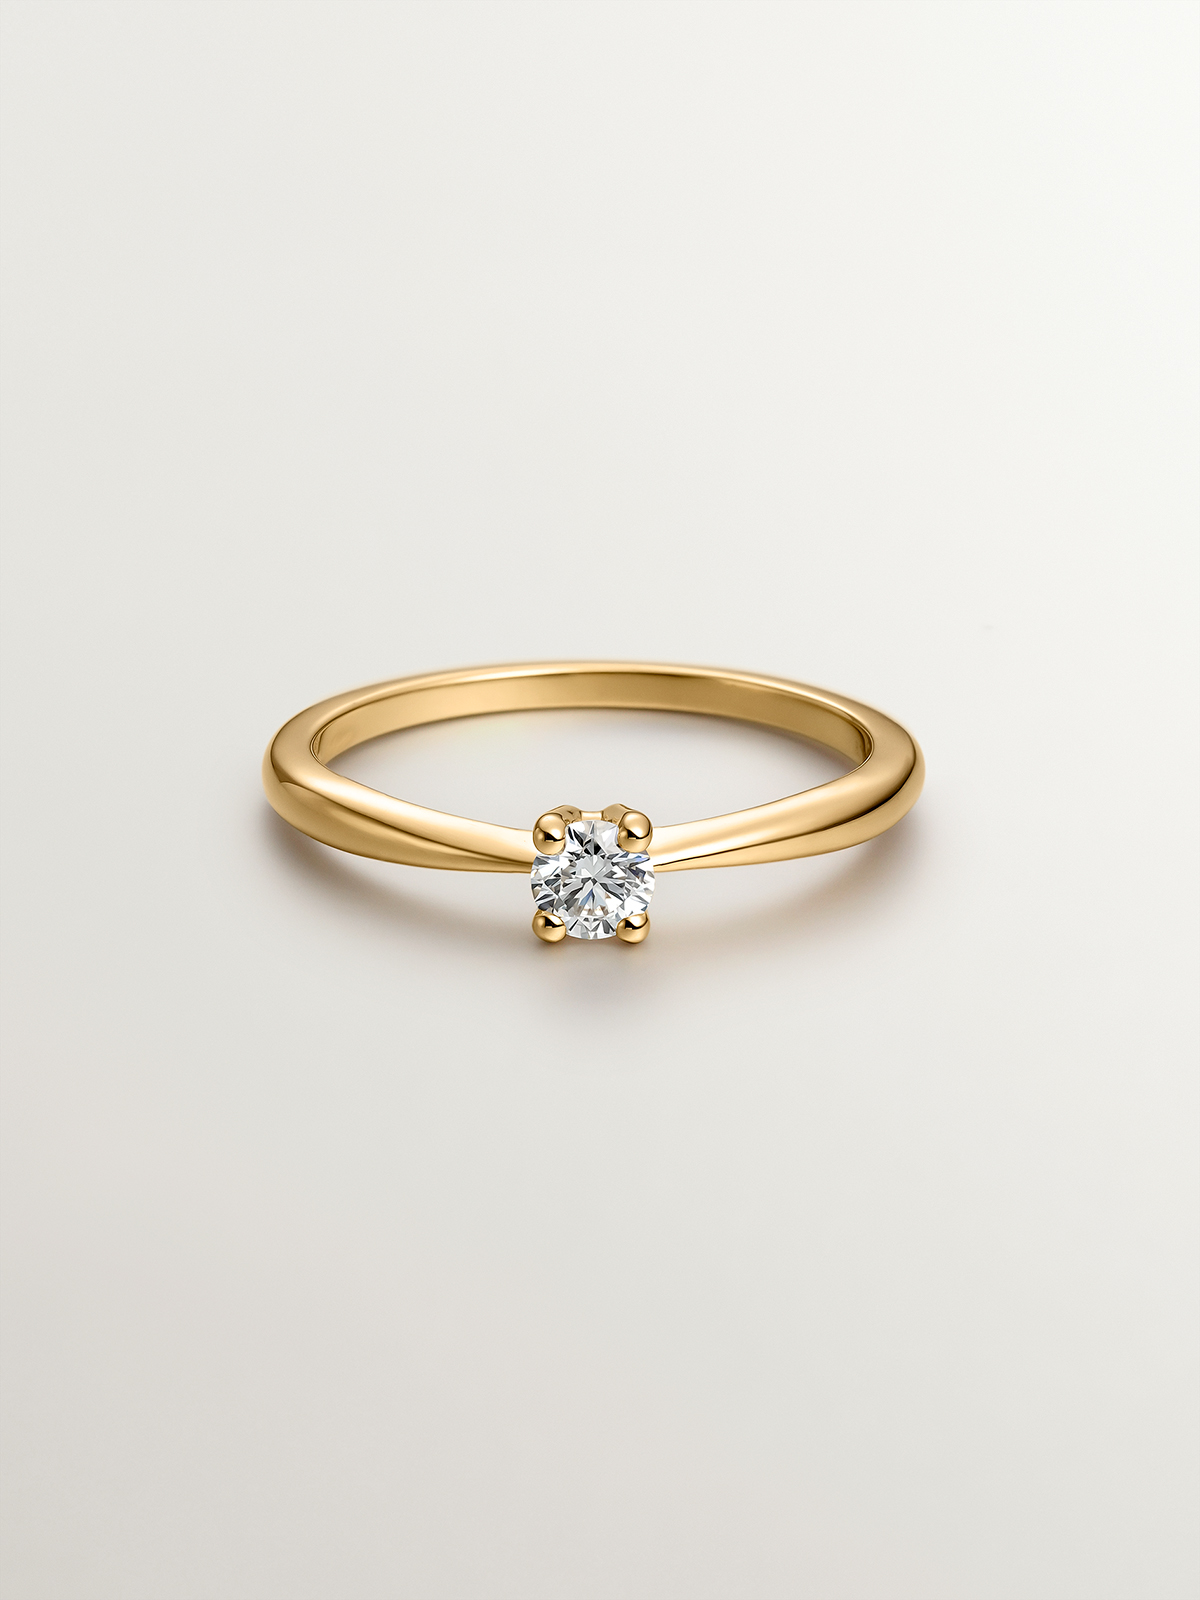 18k yellow gold solitaire ring with 0.15ct diamond